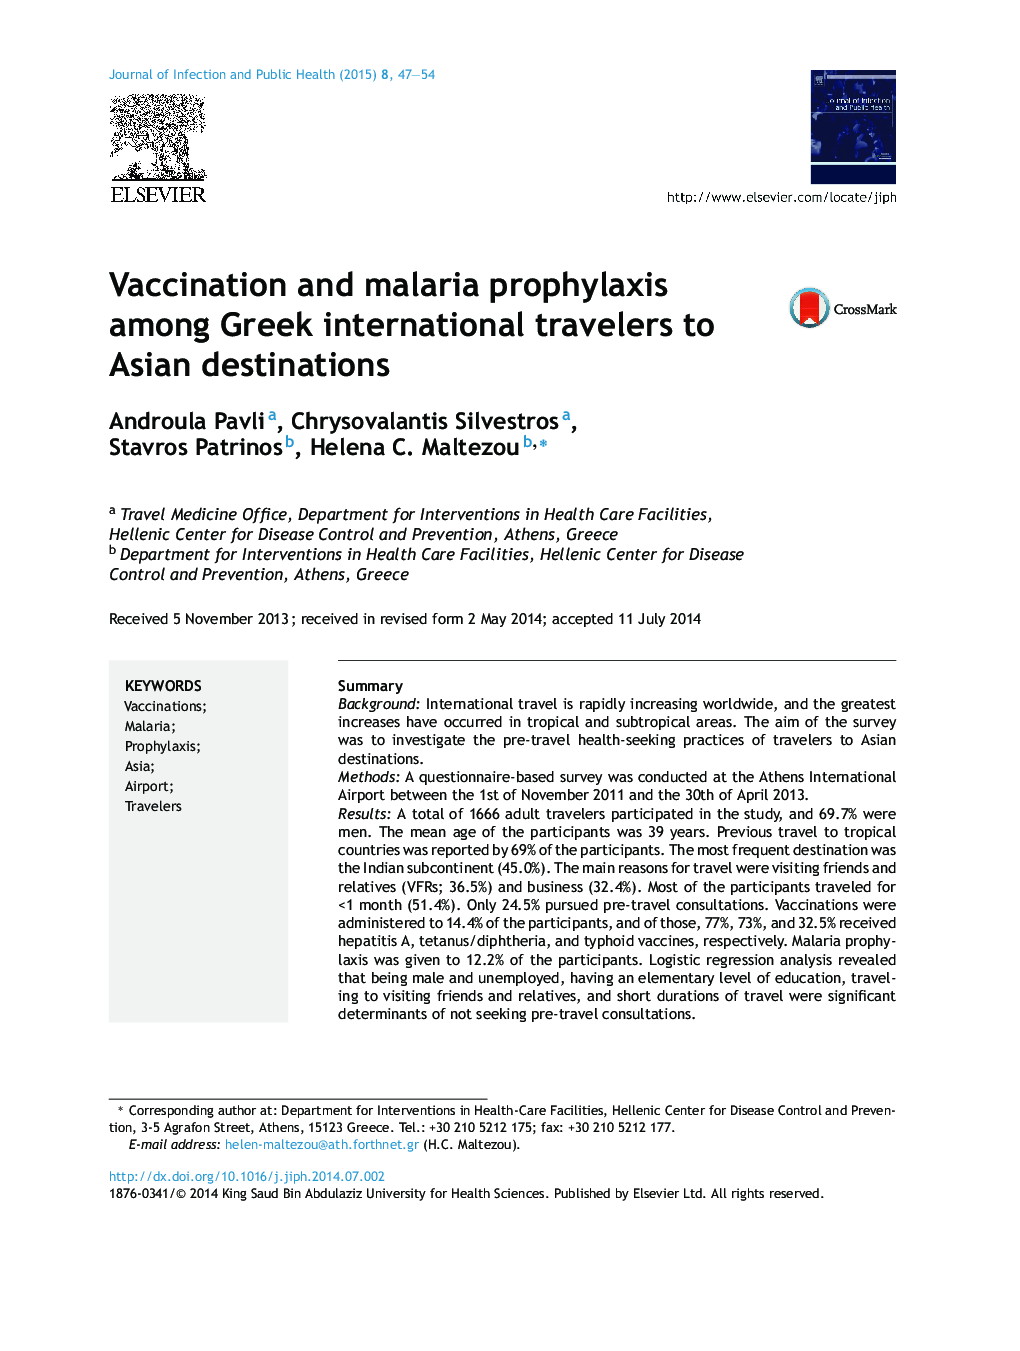 Vaccination and malaria prophylaxis among Greek international travelers to Asian destinations